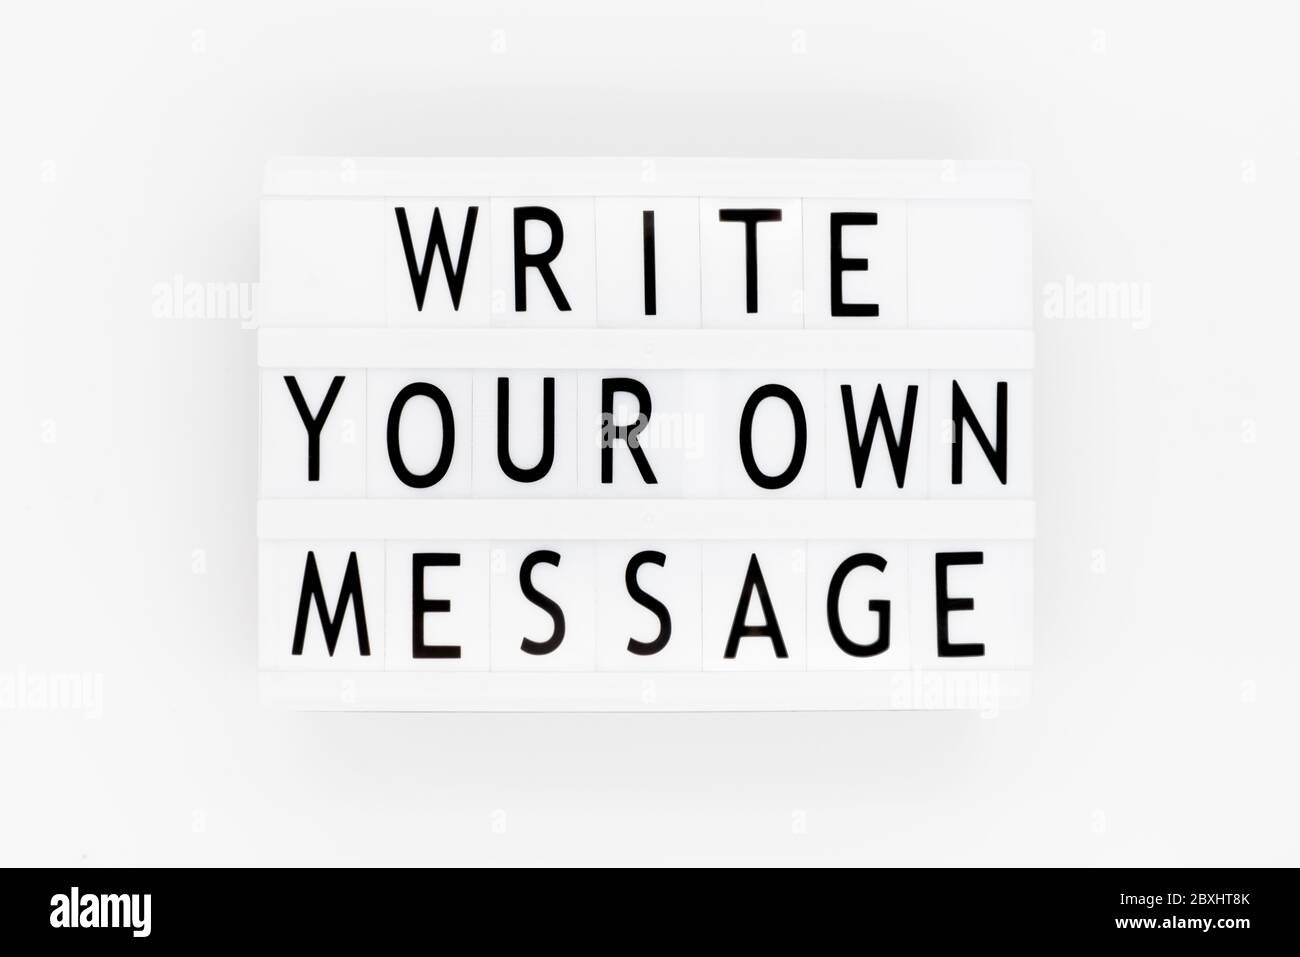 Motivational and inspirational quotes - Write your own message. Stock Photo